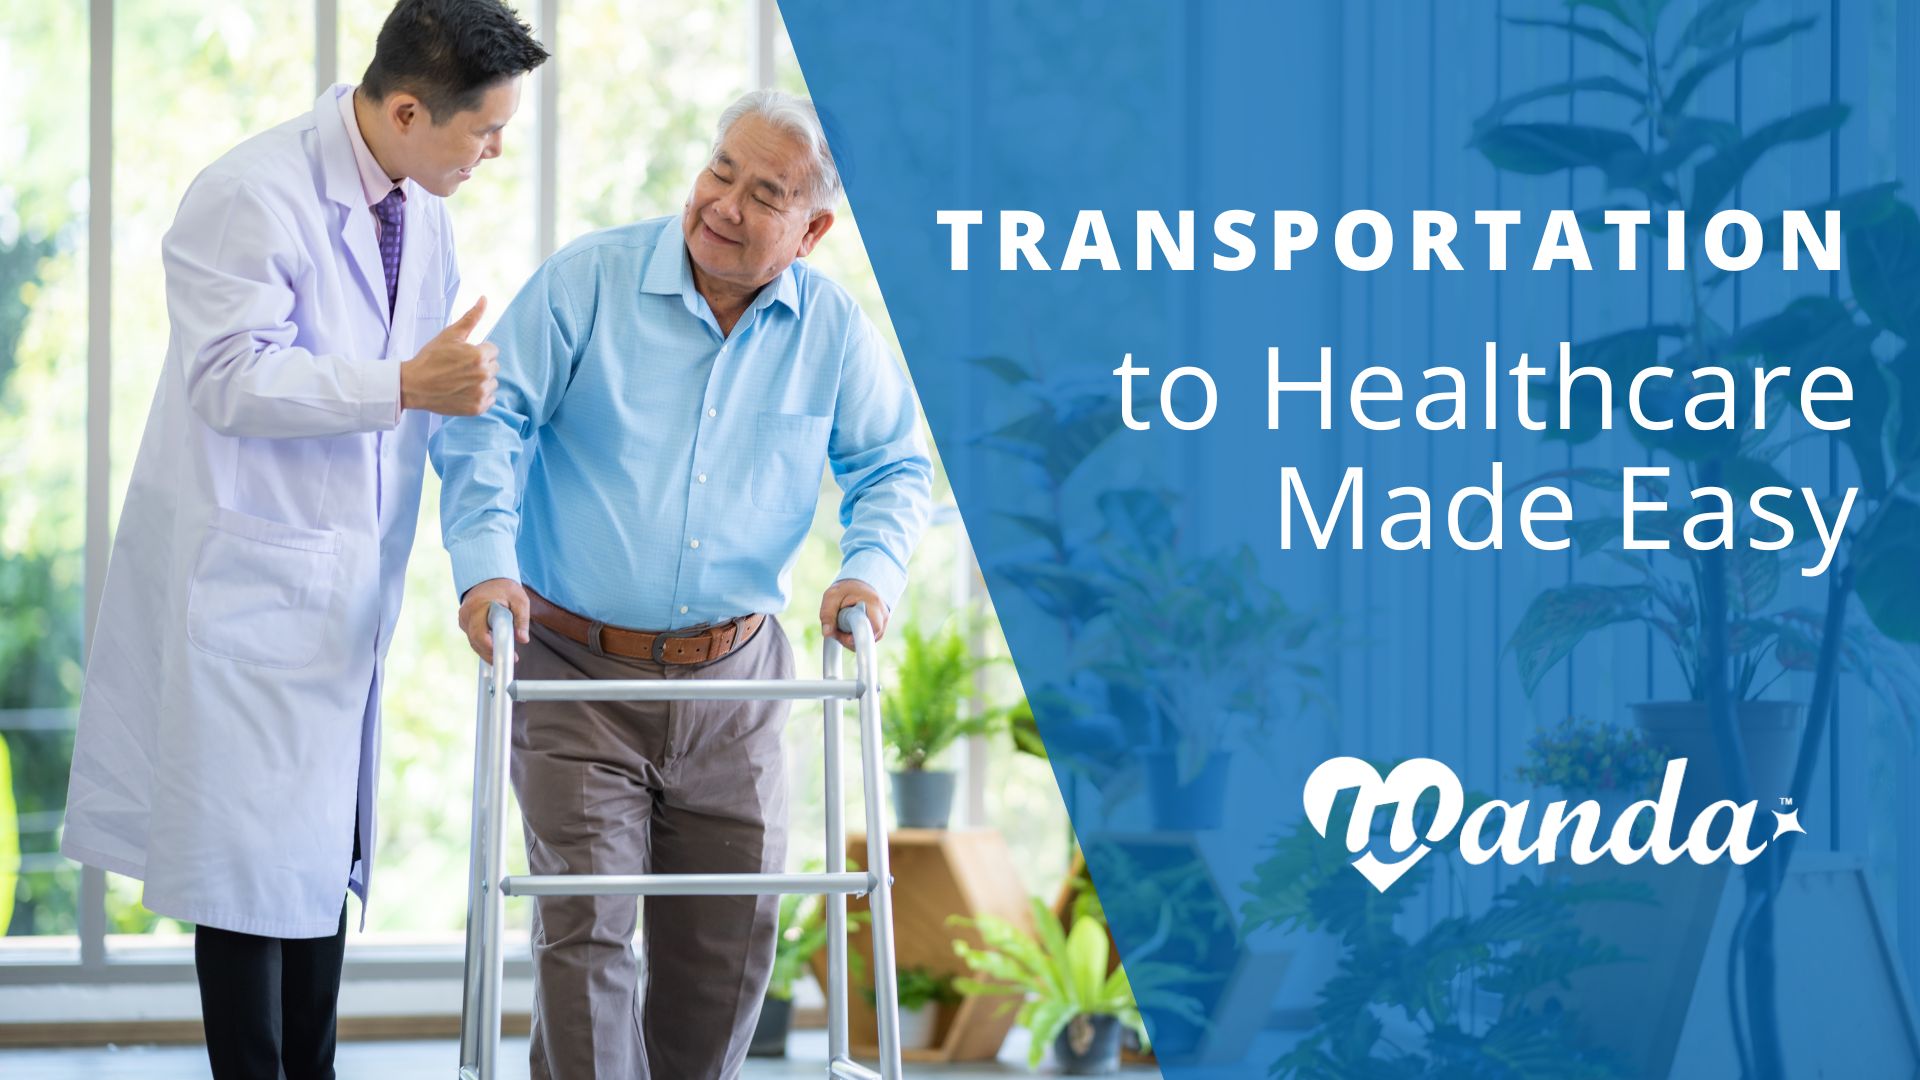 Transportation to medical appointments can be challenging for seniors and people with disabilities. Wanda is here to help!